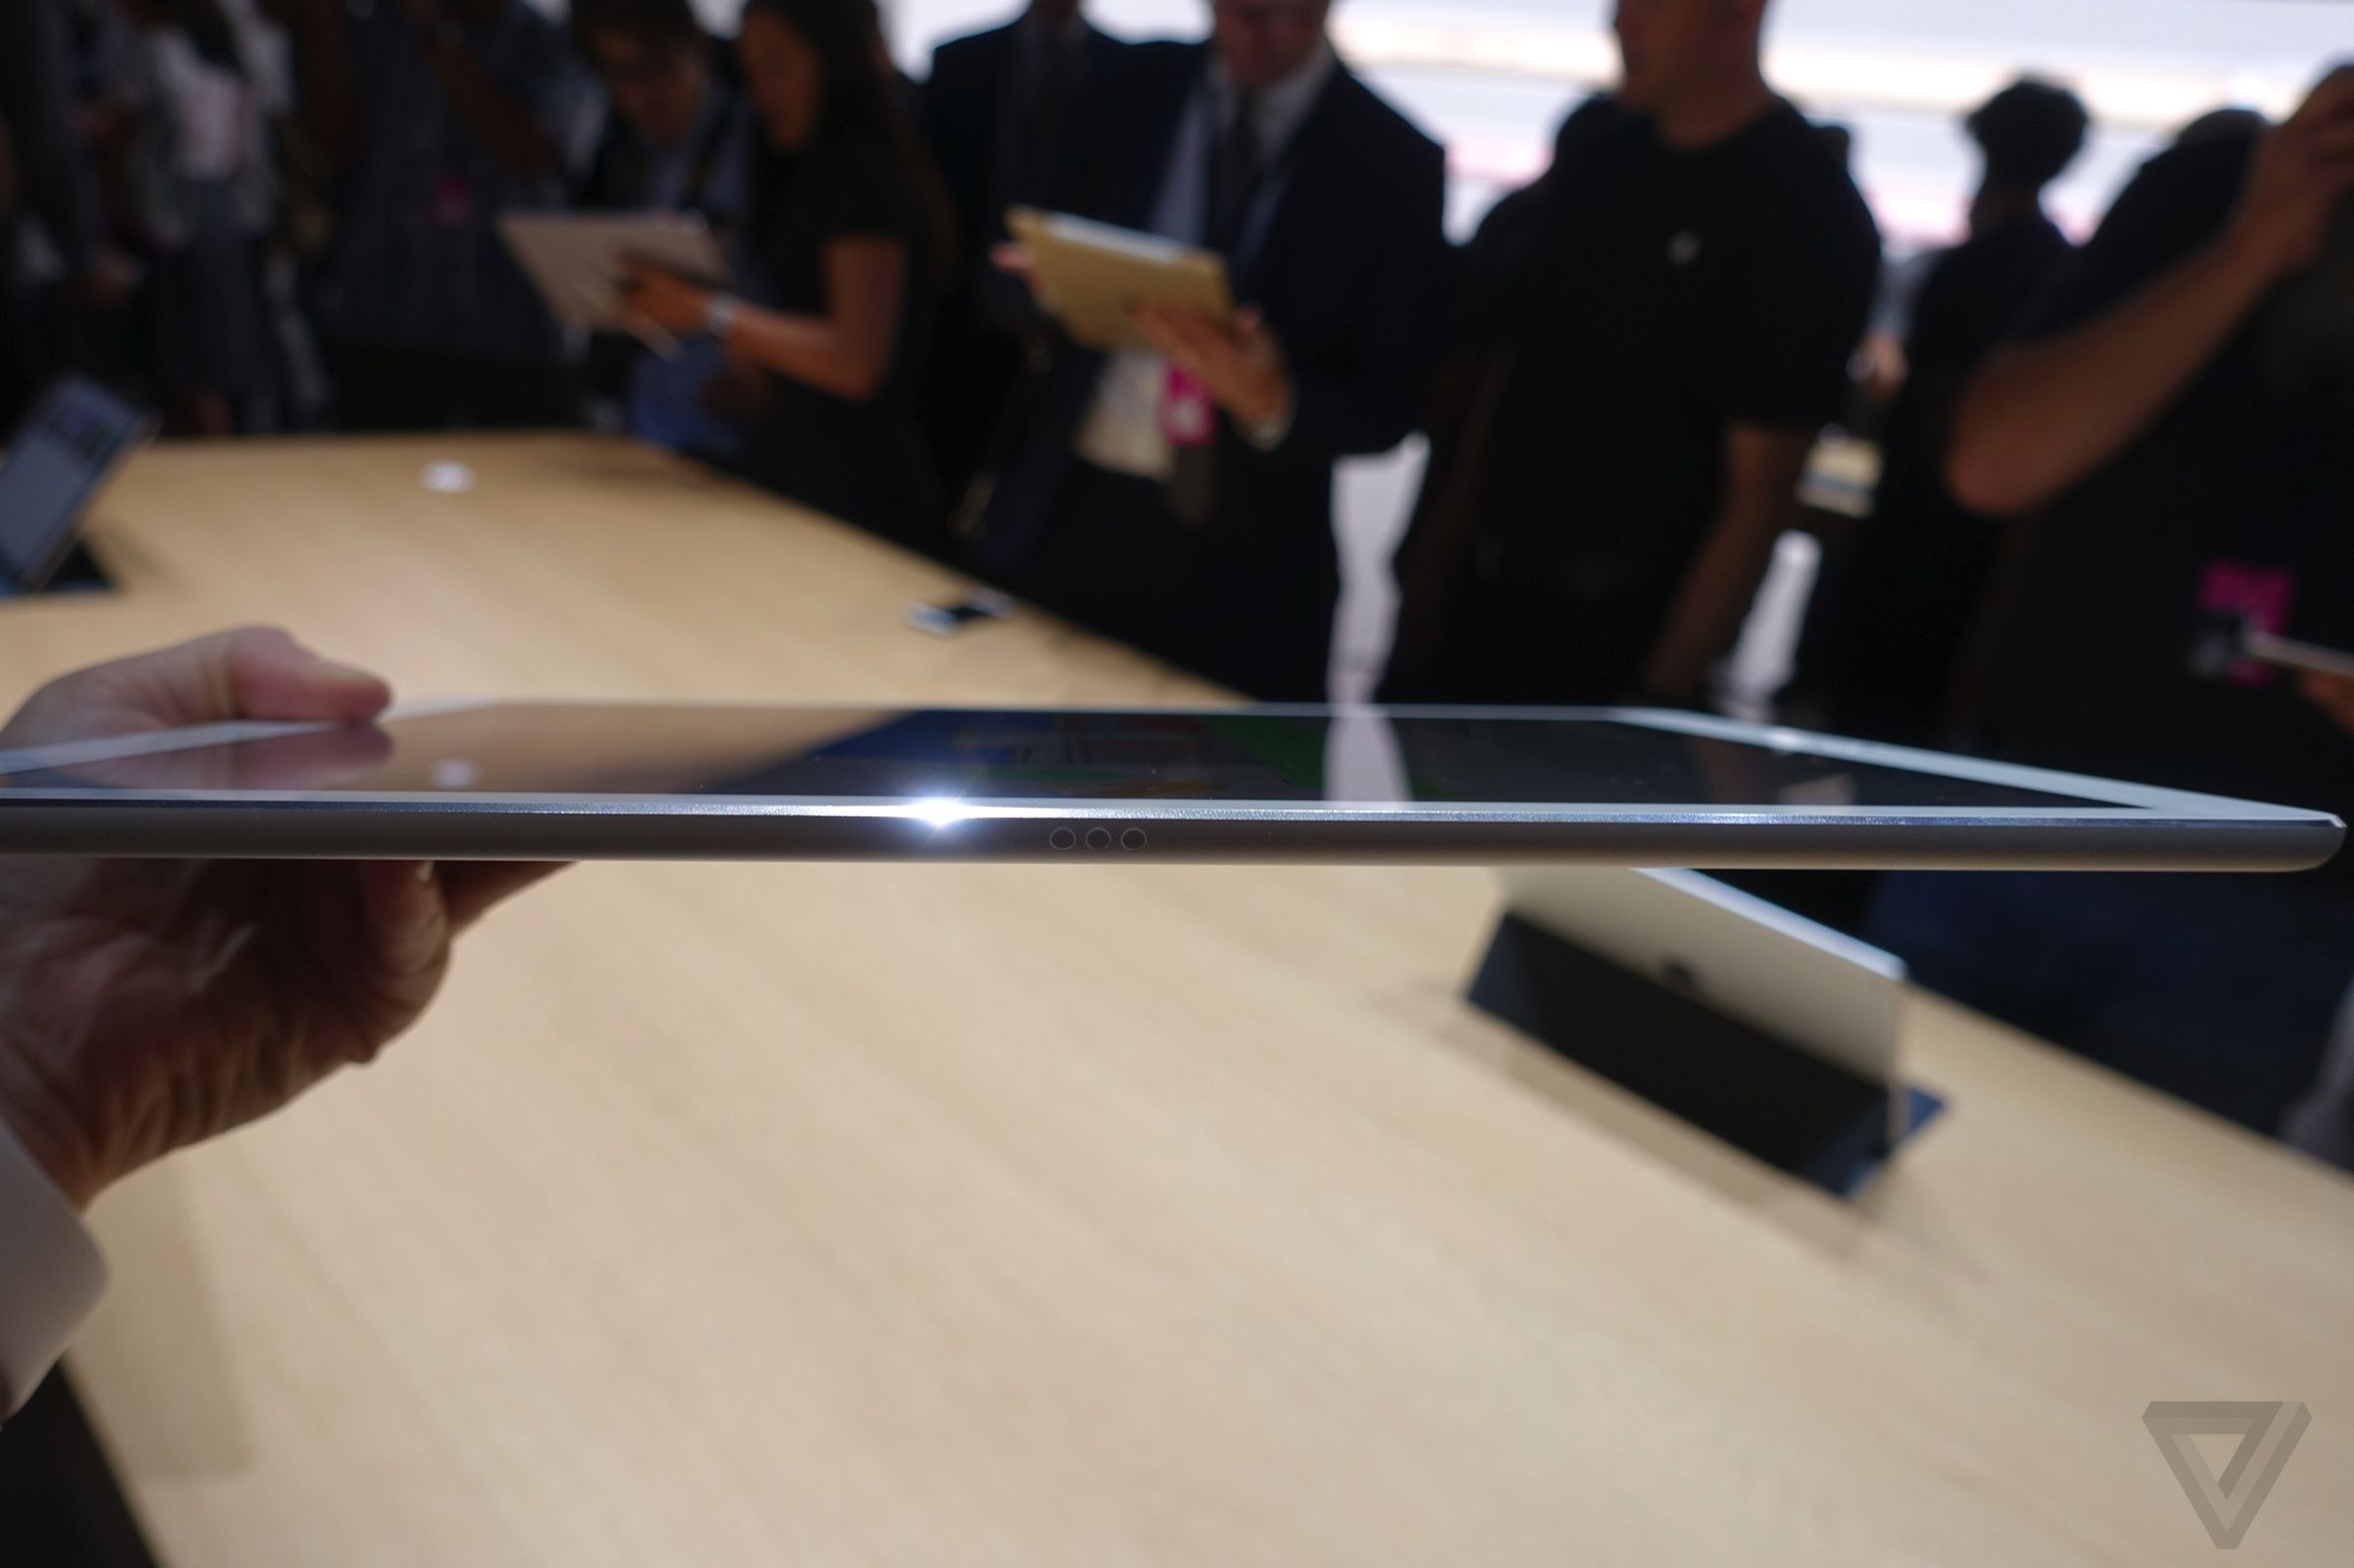 Hands-on with Apple's new iPad Pro